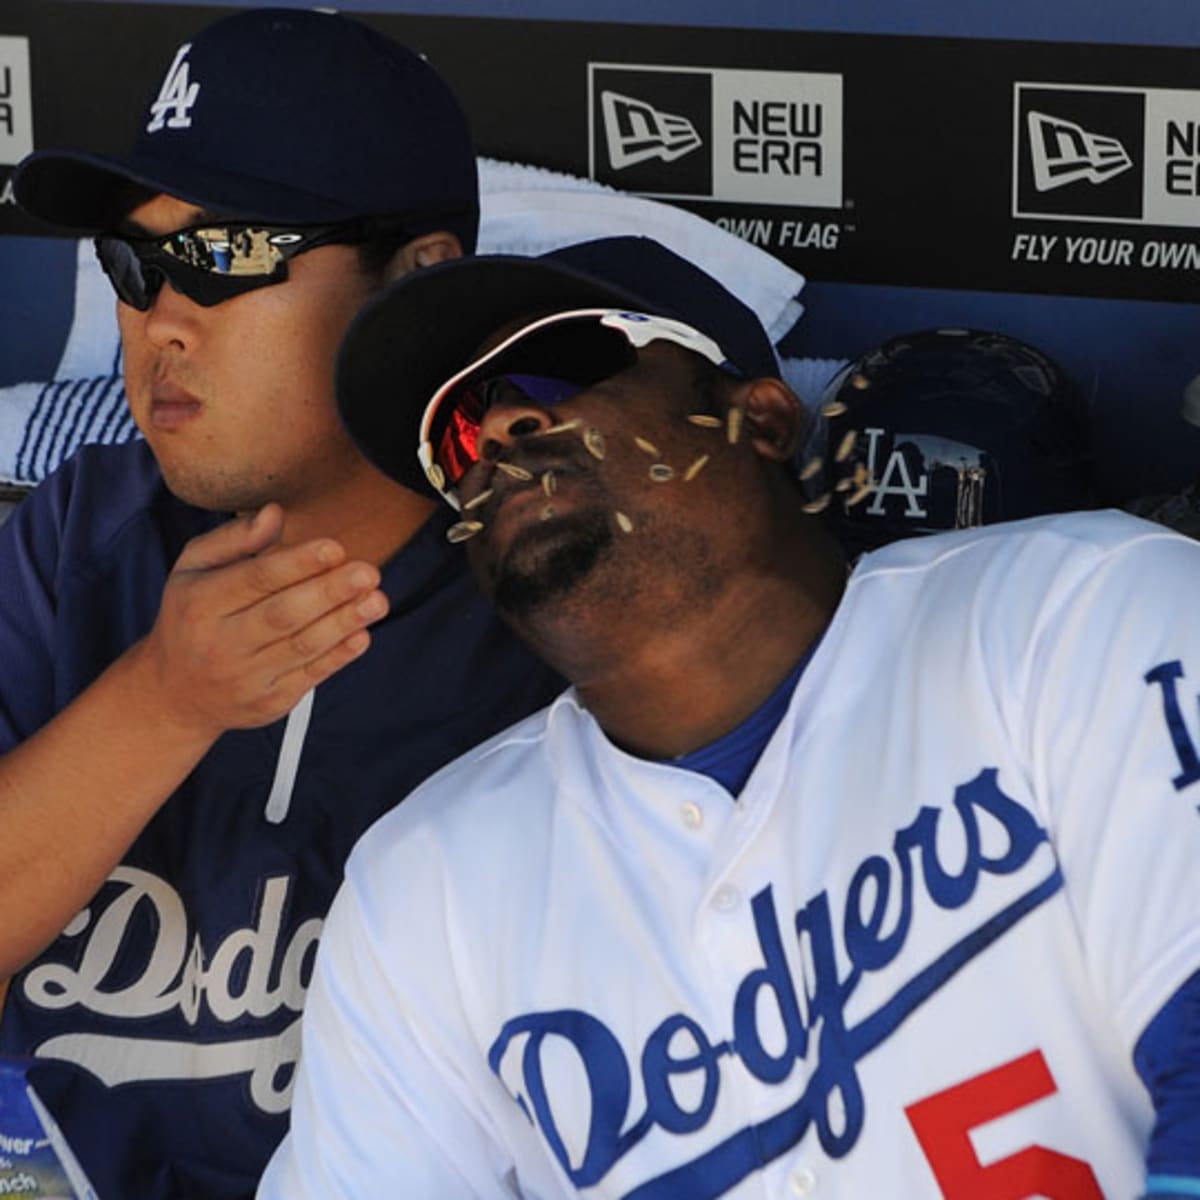 Los Angeles Dodgers pitcher Hyun-jin Ryu wore a hat with Juan Uribe's name  on it - Sports Illustrated